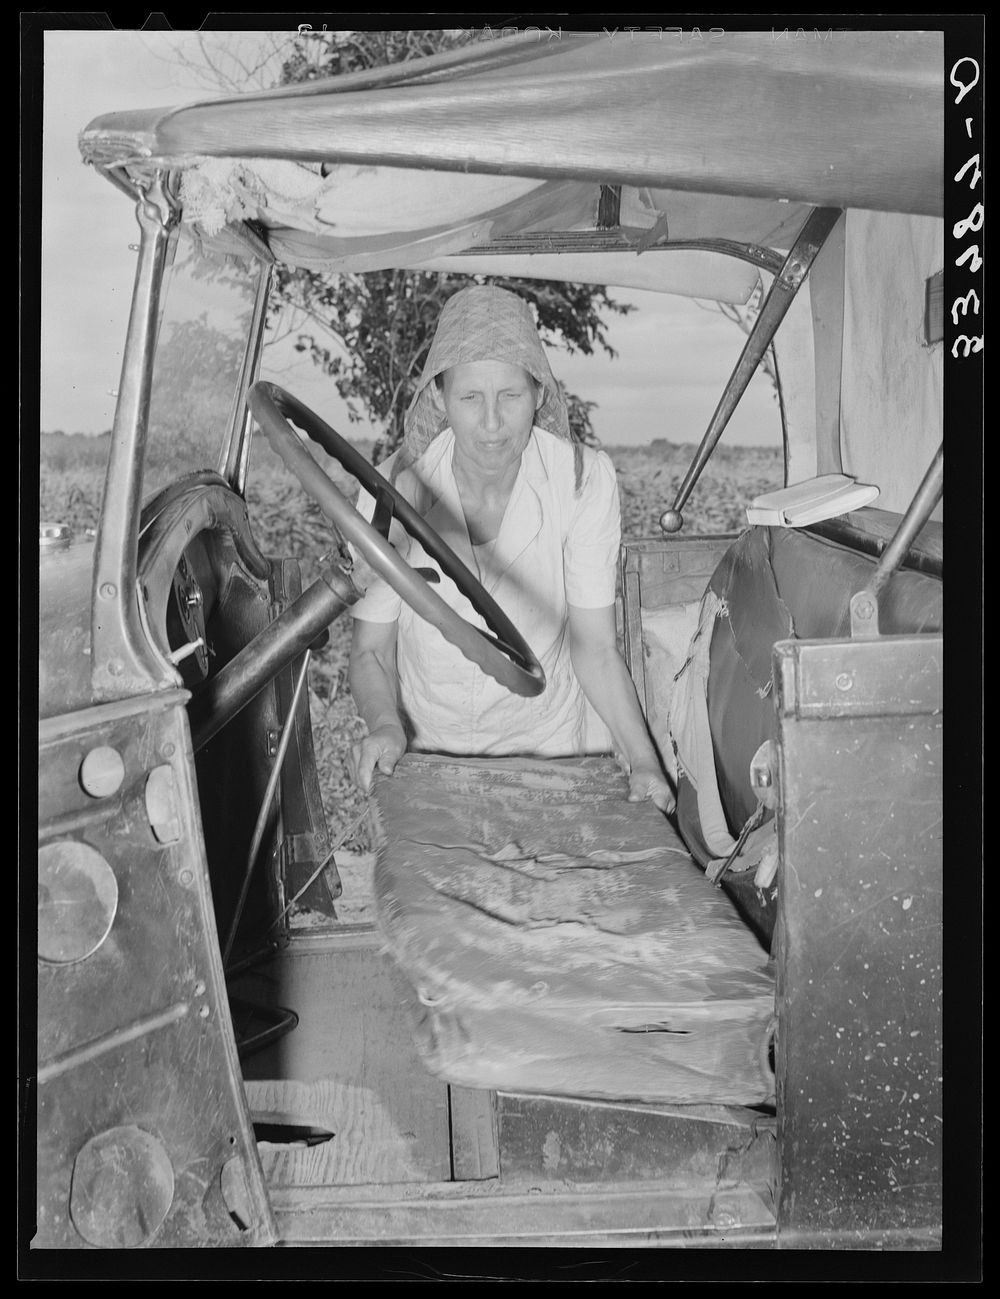 Mrs. Elmer Thomas, migrant to California, putting the front seat of their truck in place preparatory to departure from…